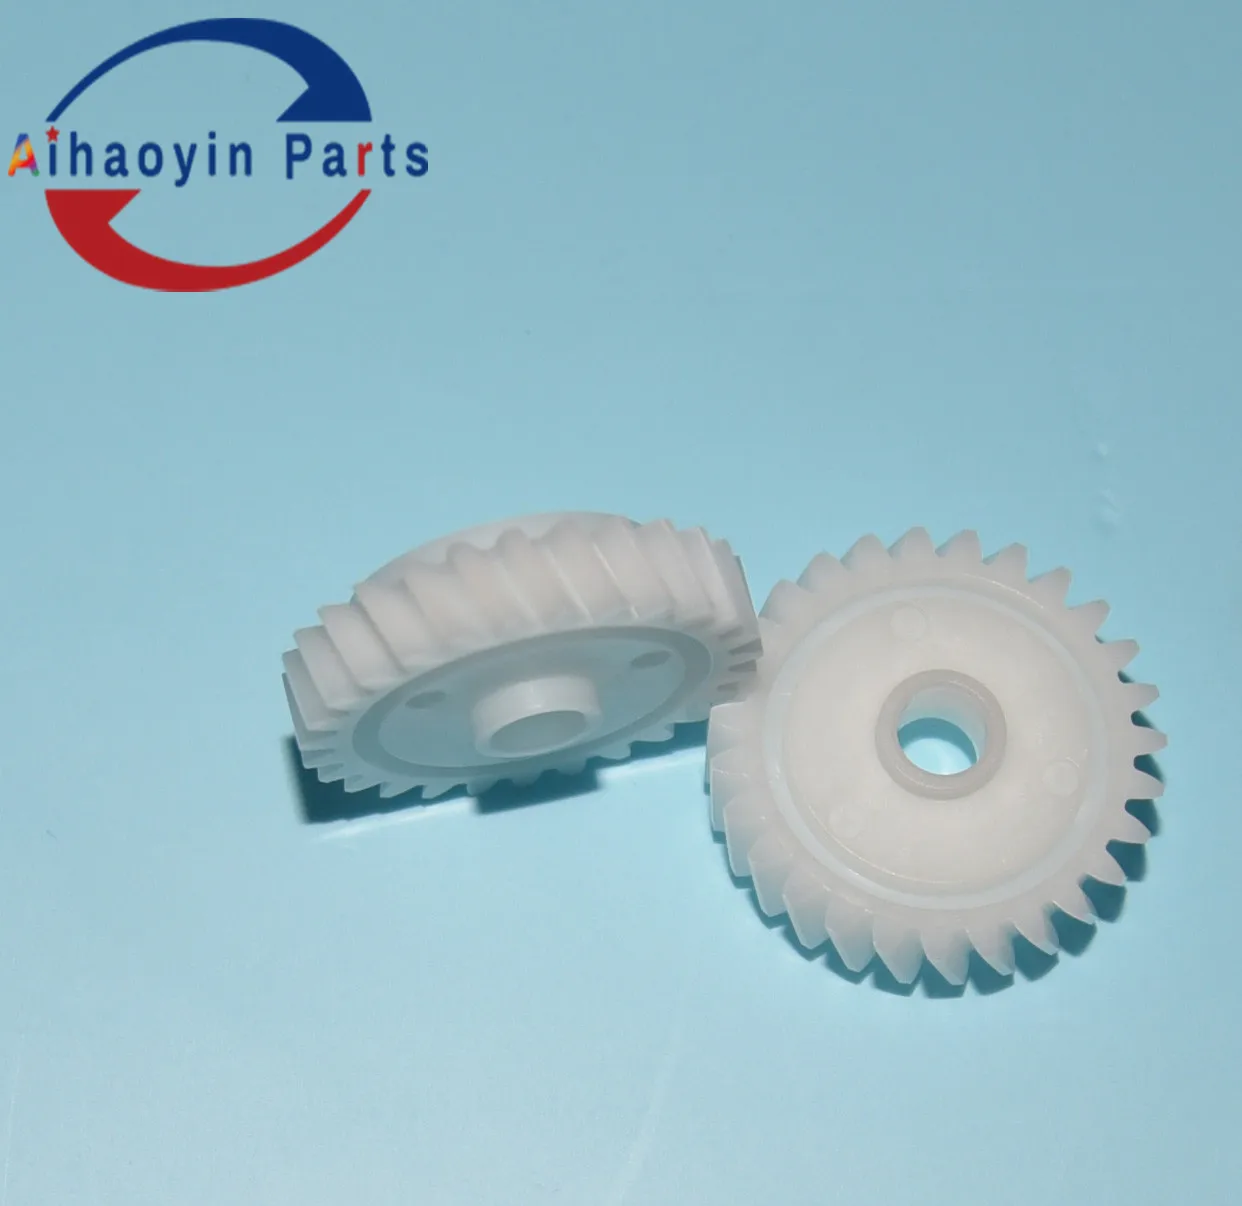 

10pcs original FU9-0401-000 27T Fixing Gear for Canon imageRUNNER iR 1730 1730iF 1740 1740iF 1750 1750iF ADVANCE ADV 400iF 500iF